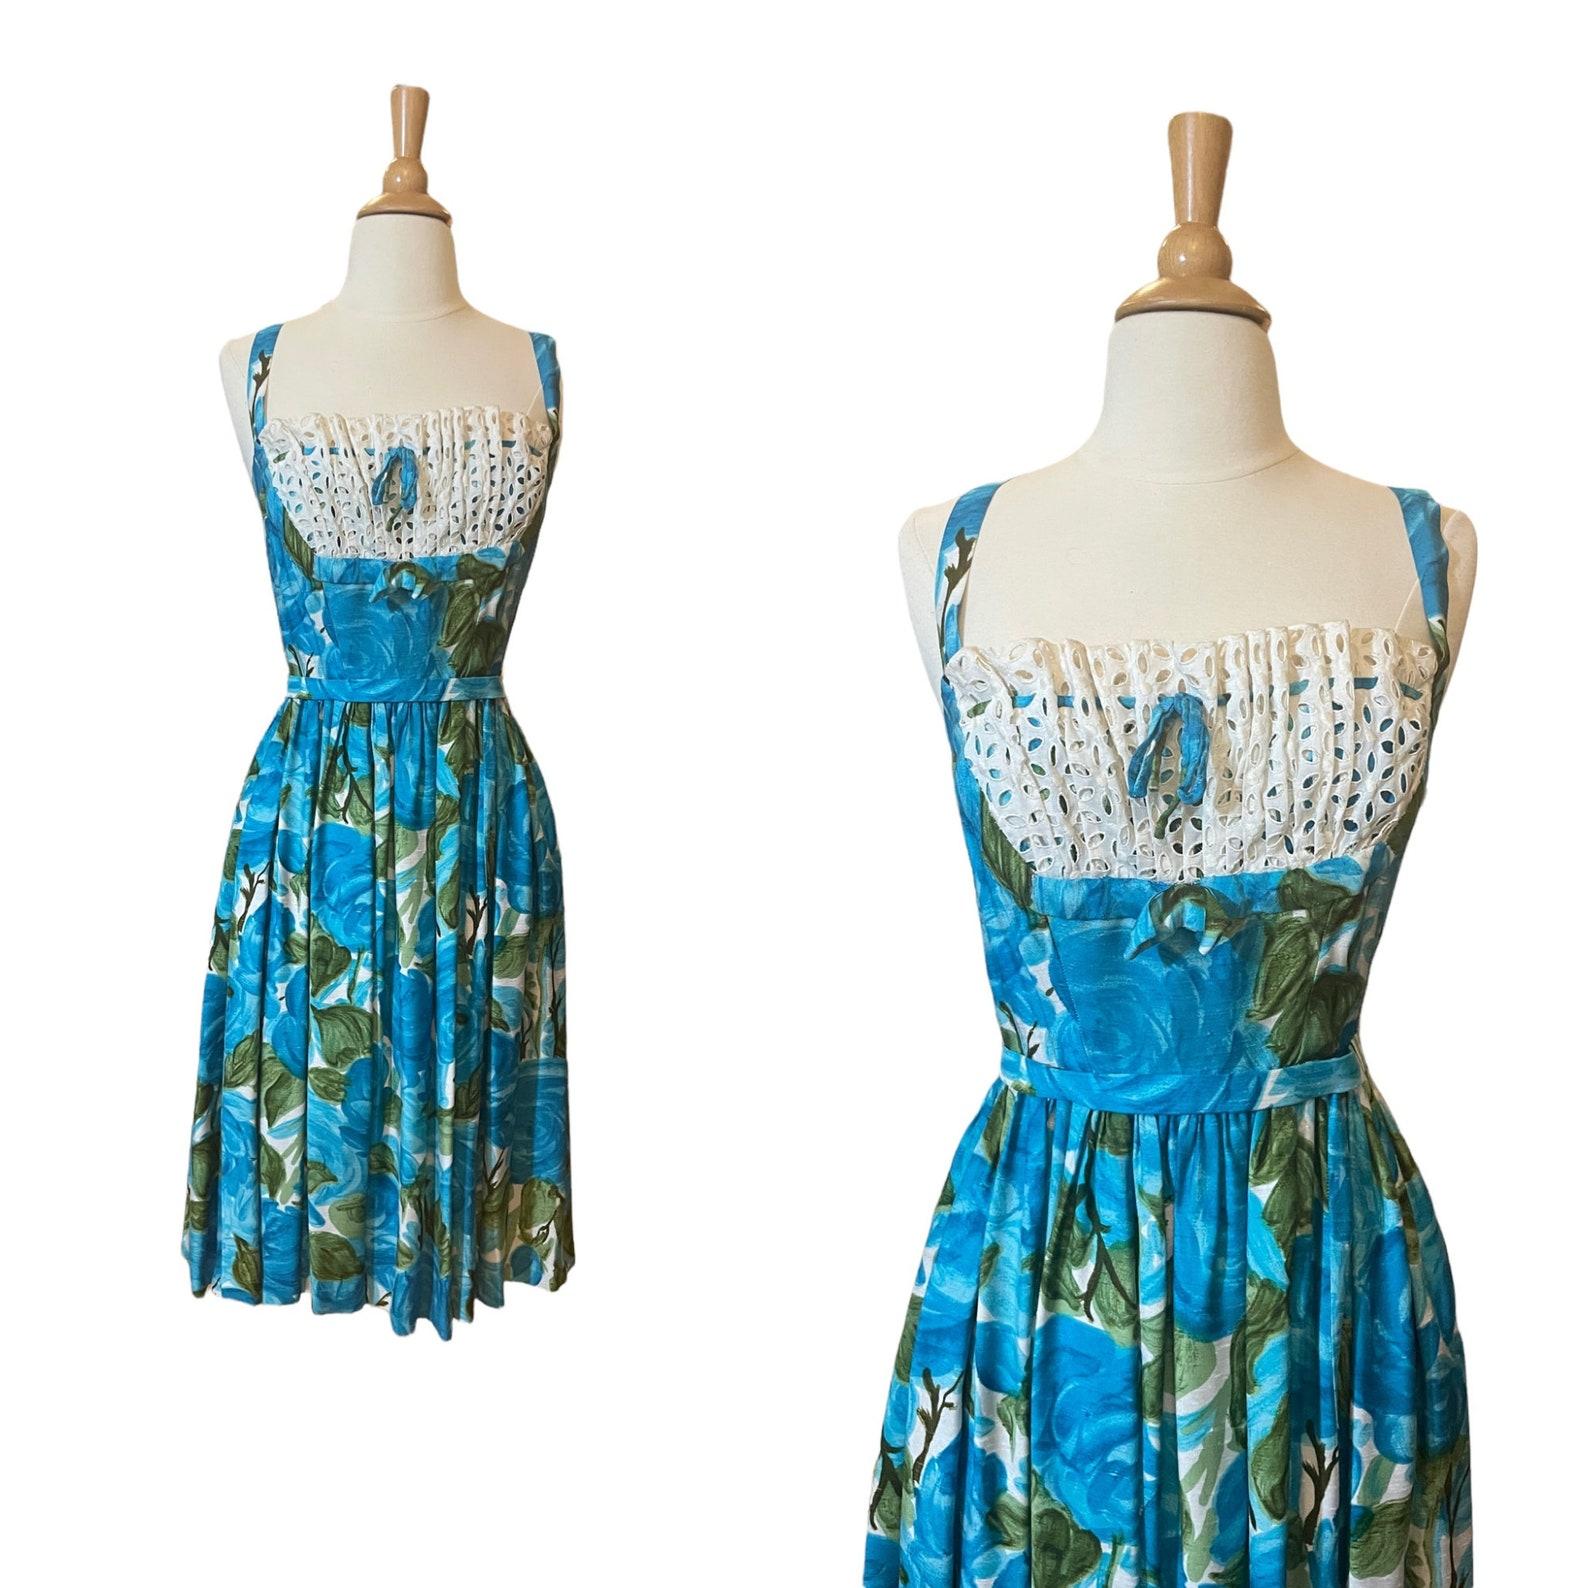 vintage blue & green watercolor floral & leaf print dress. fit and flair silhouette. white eyelet lace ruffled 